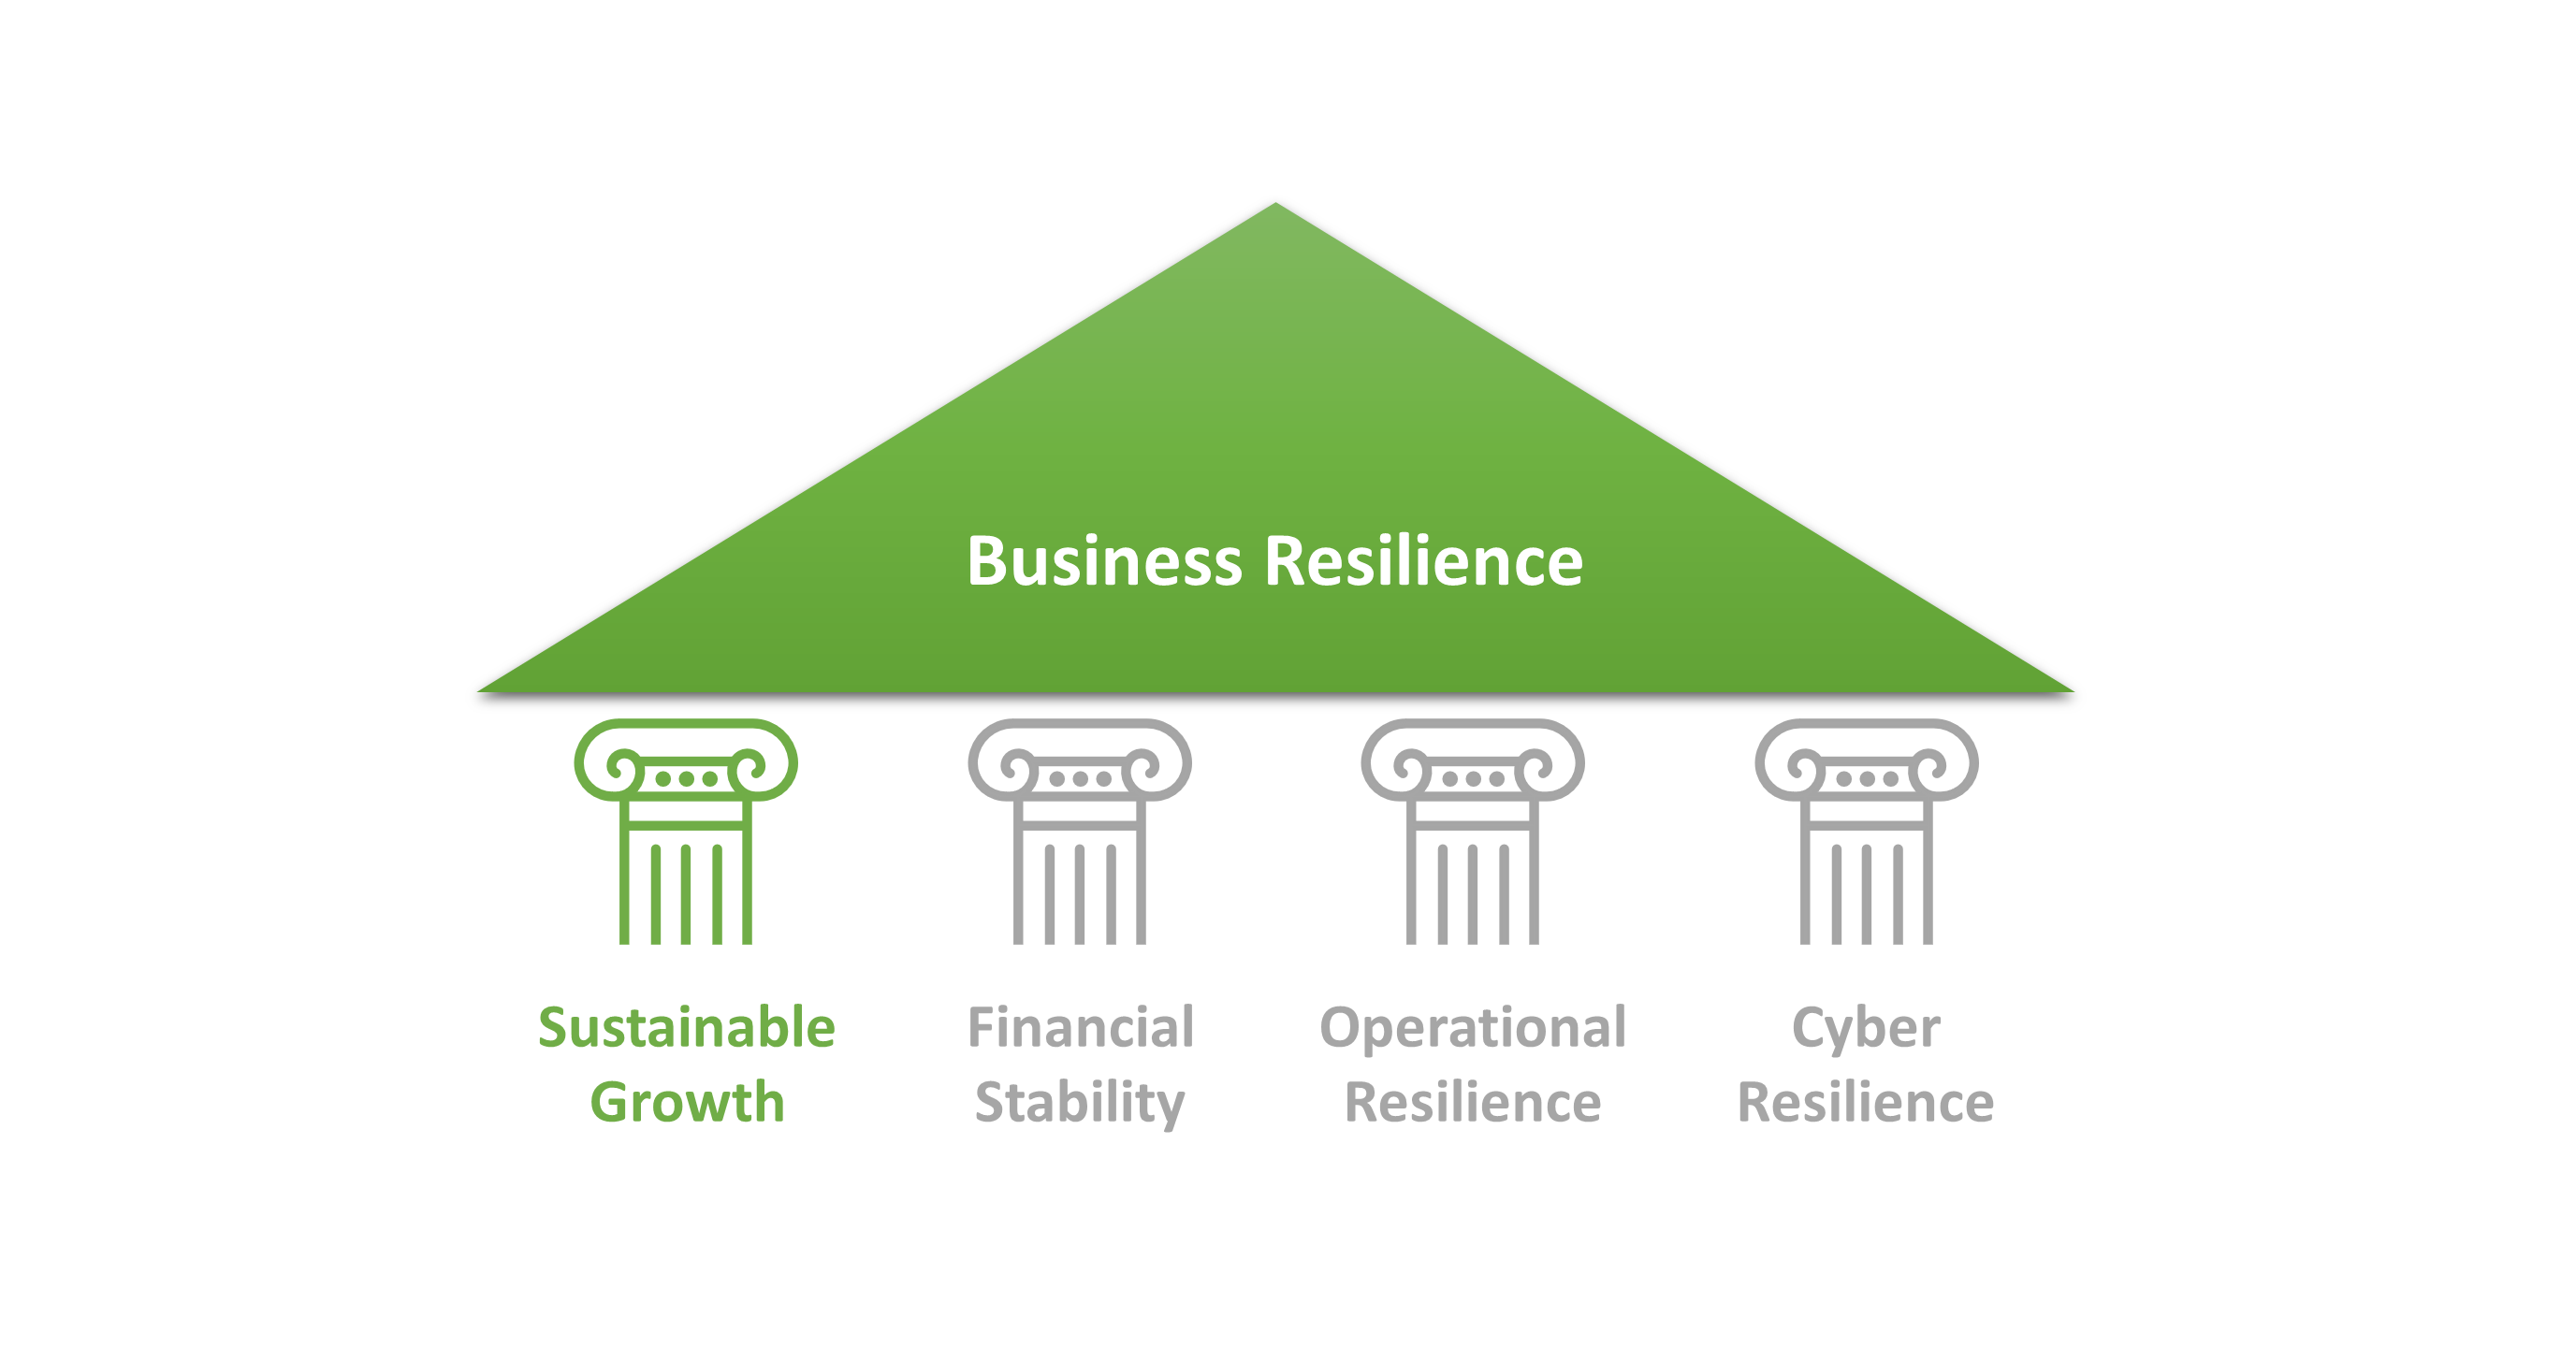 Sustainable Growth - Key Pillar of Business Resilience